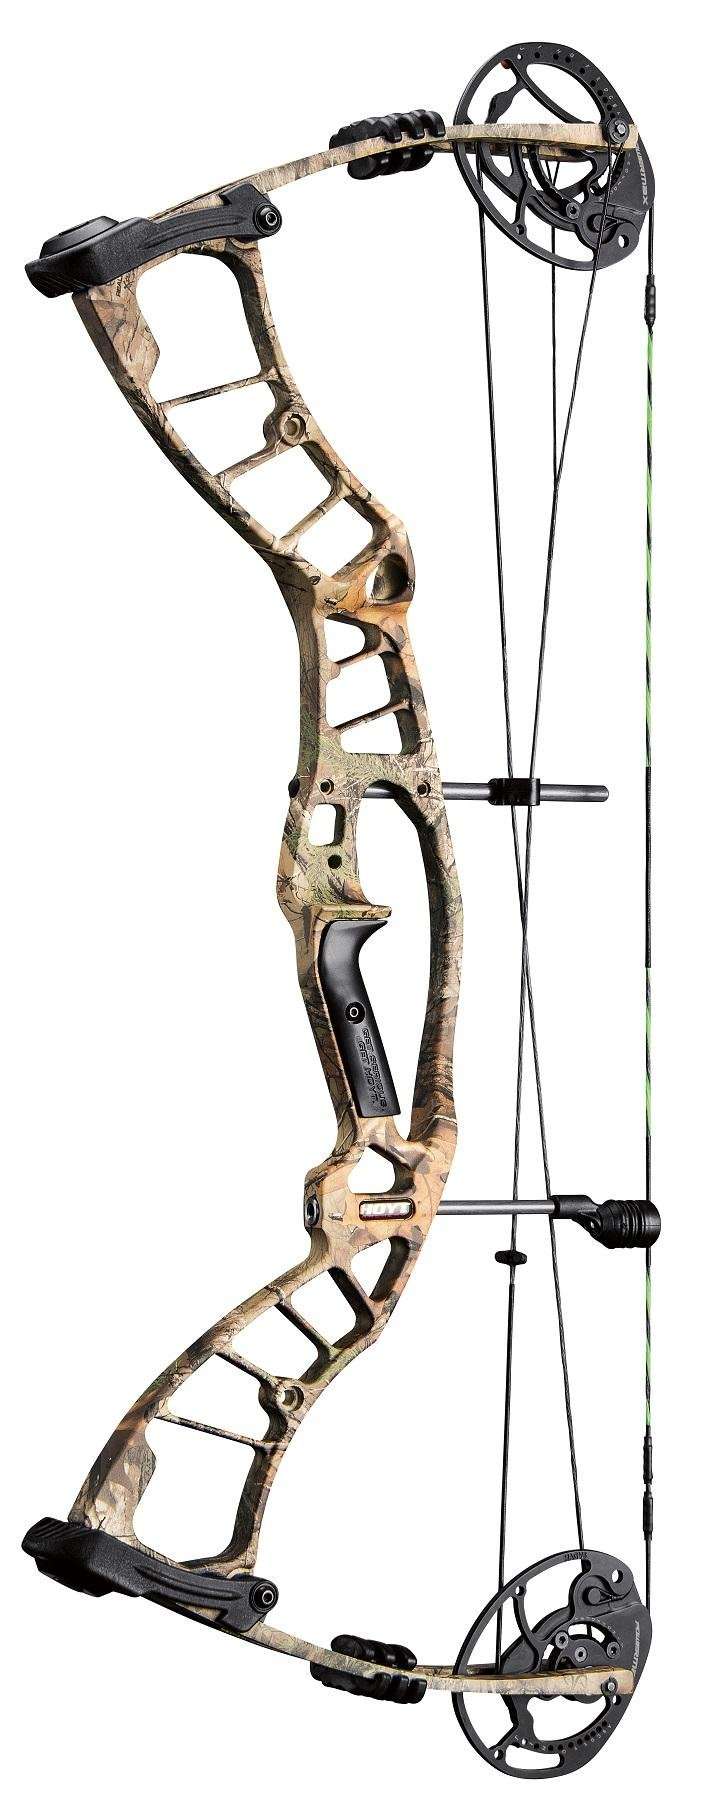 Hoyt PowerMax Compound Bow for 2016